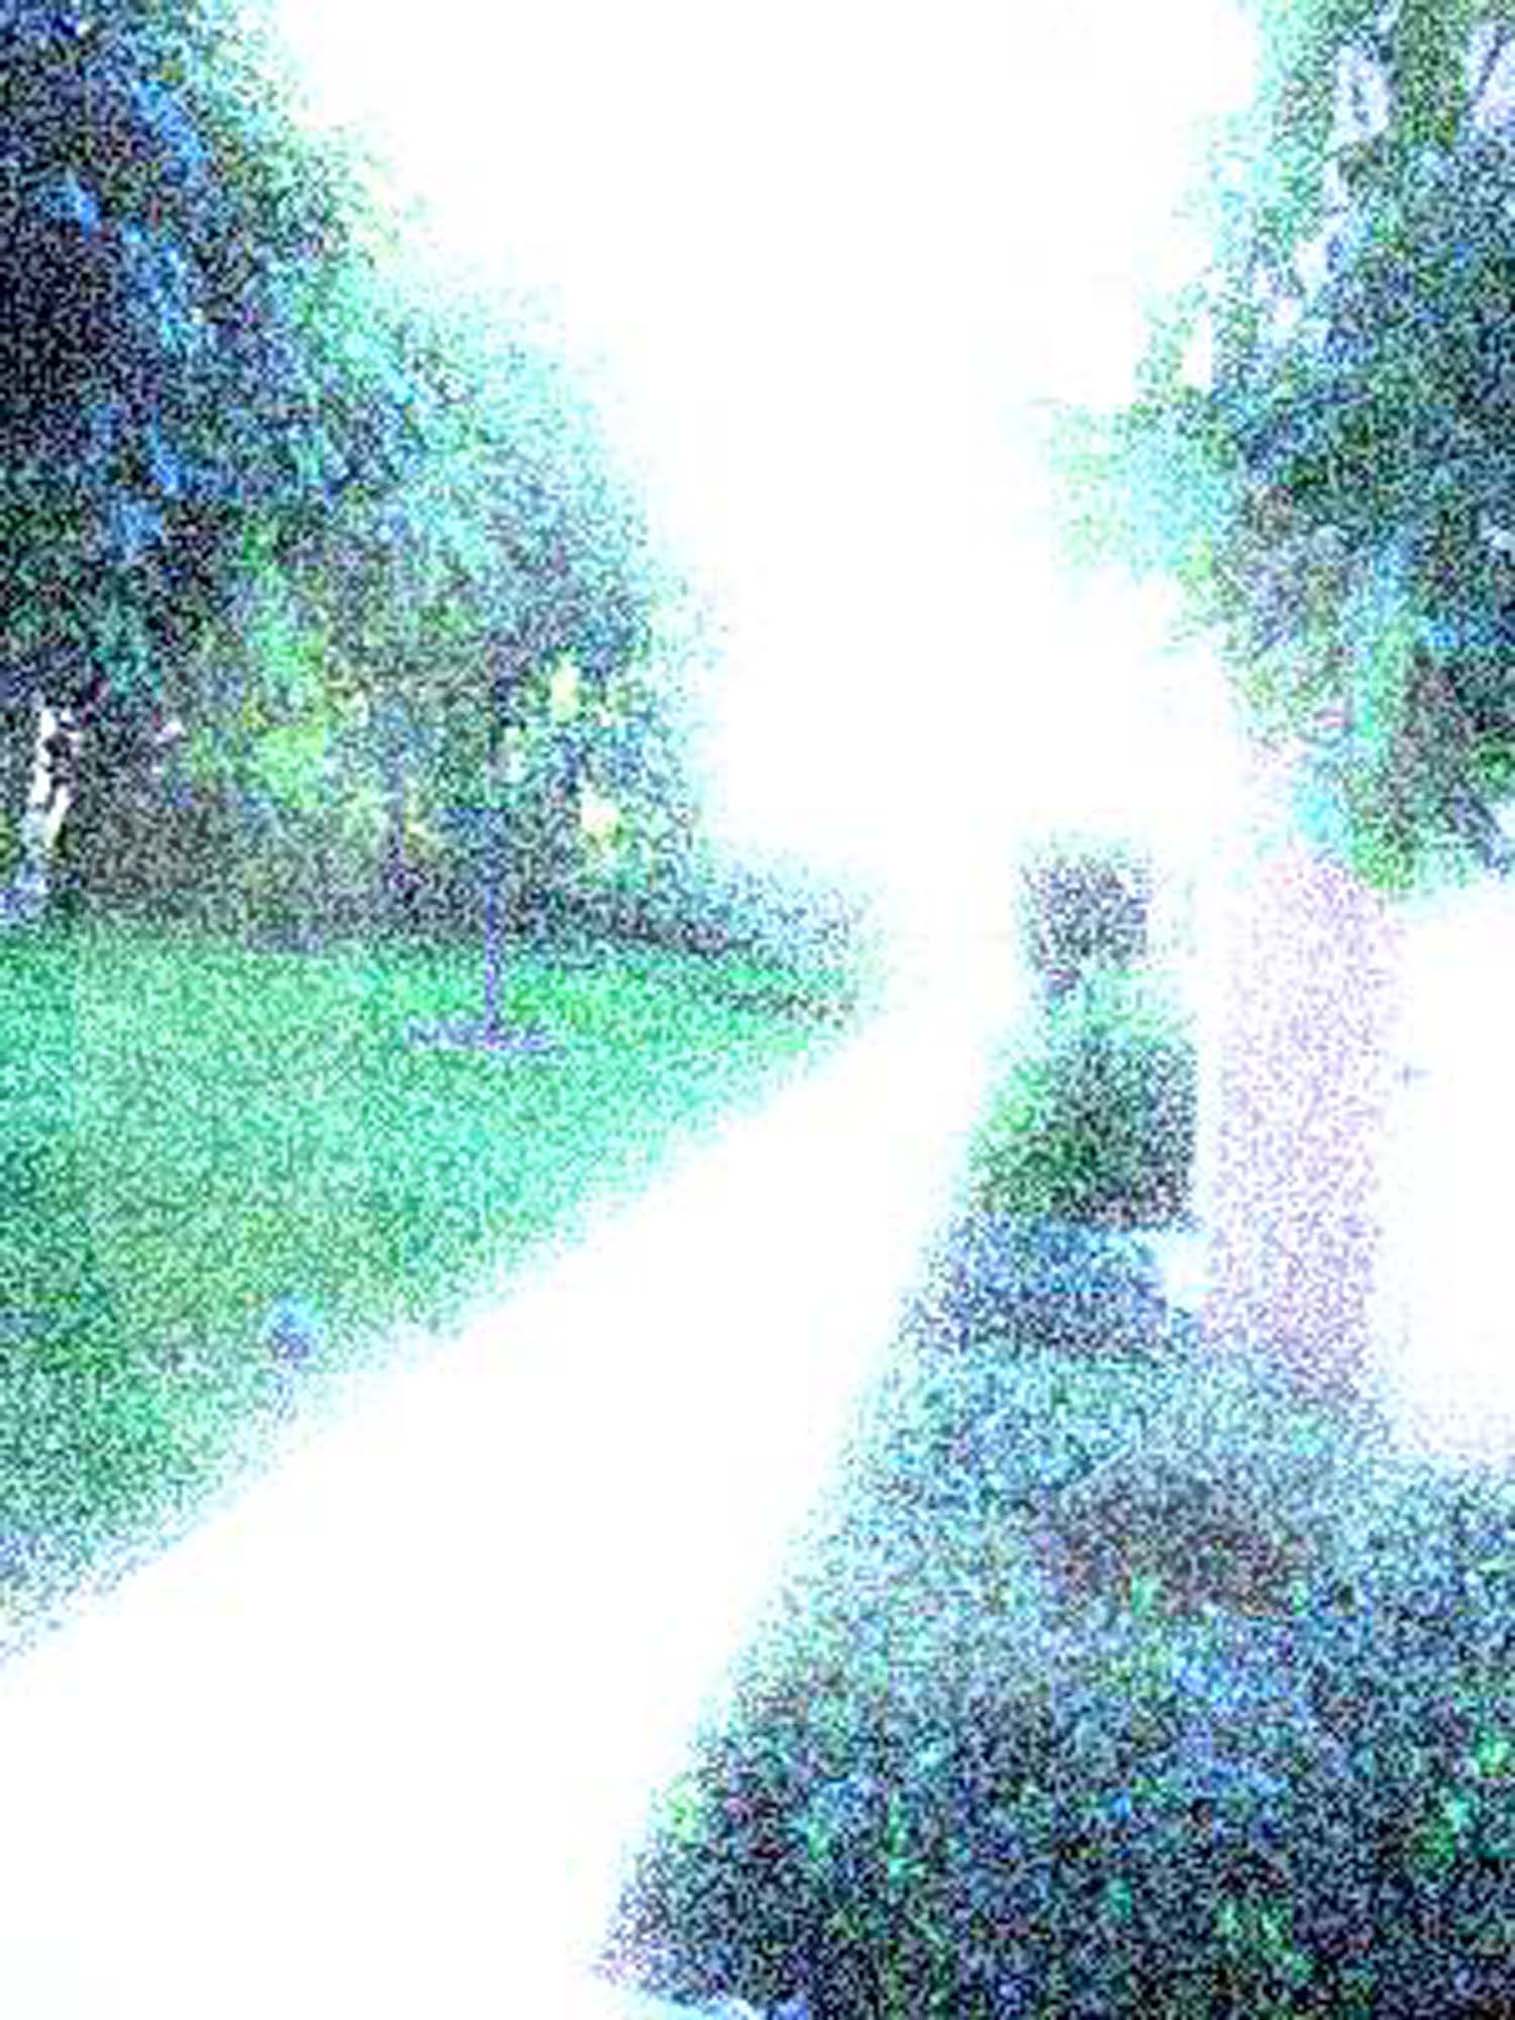 photography therapy,ptsd,anxiety,memory,photoshop,grace divine,prolongued exposure,image memories,california,aliso viejo land